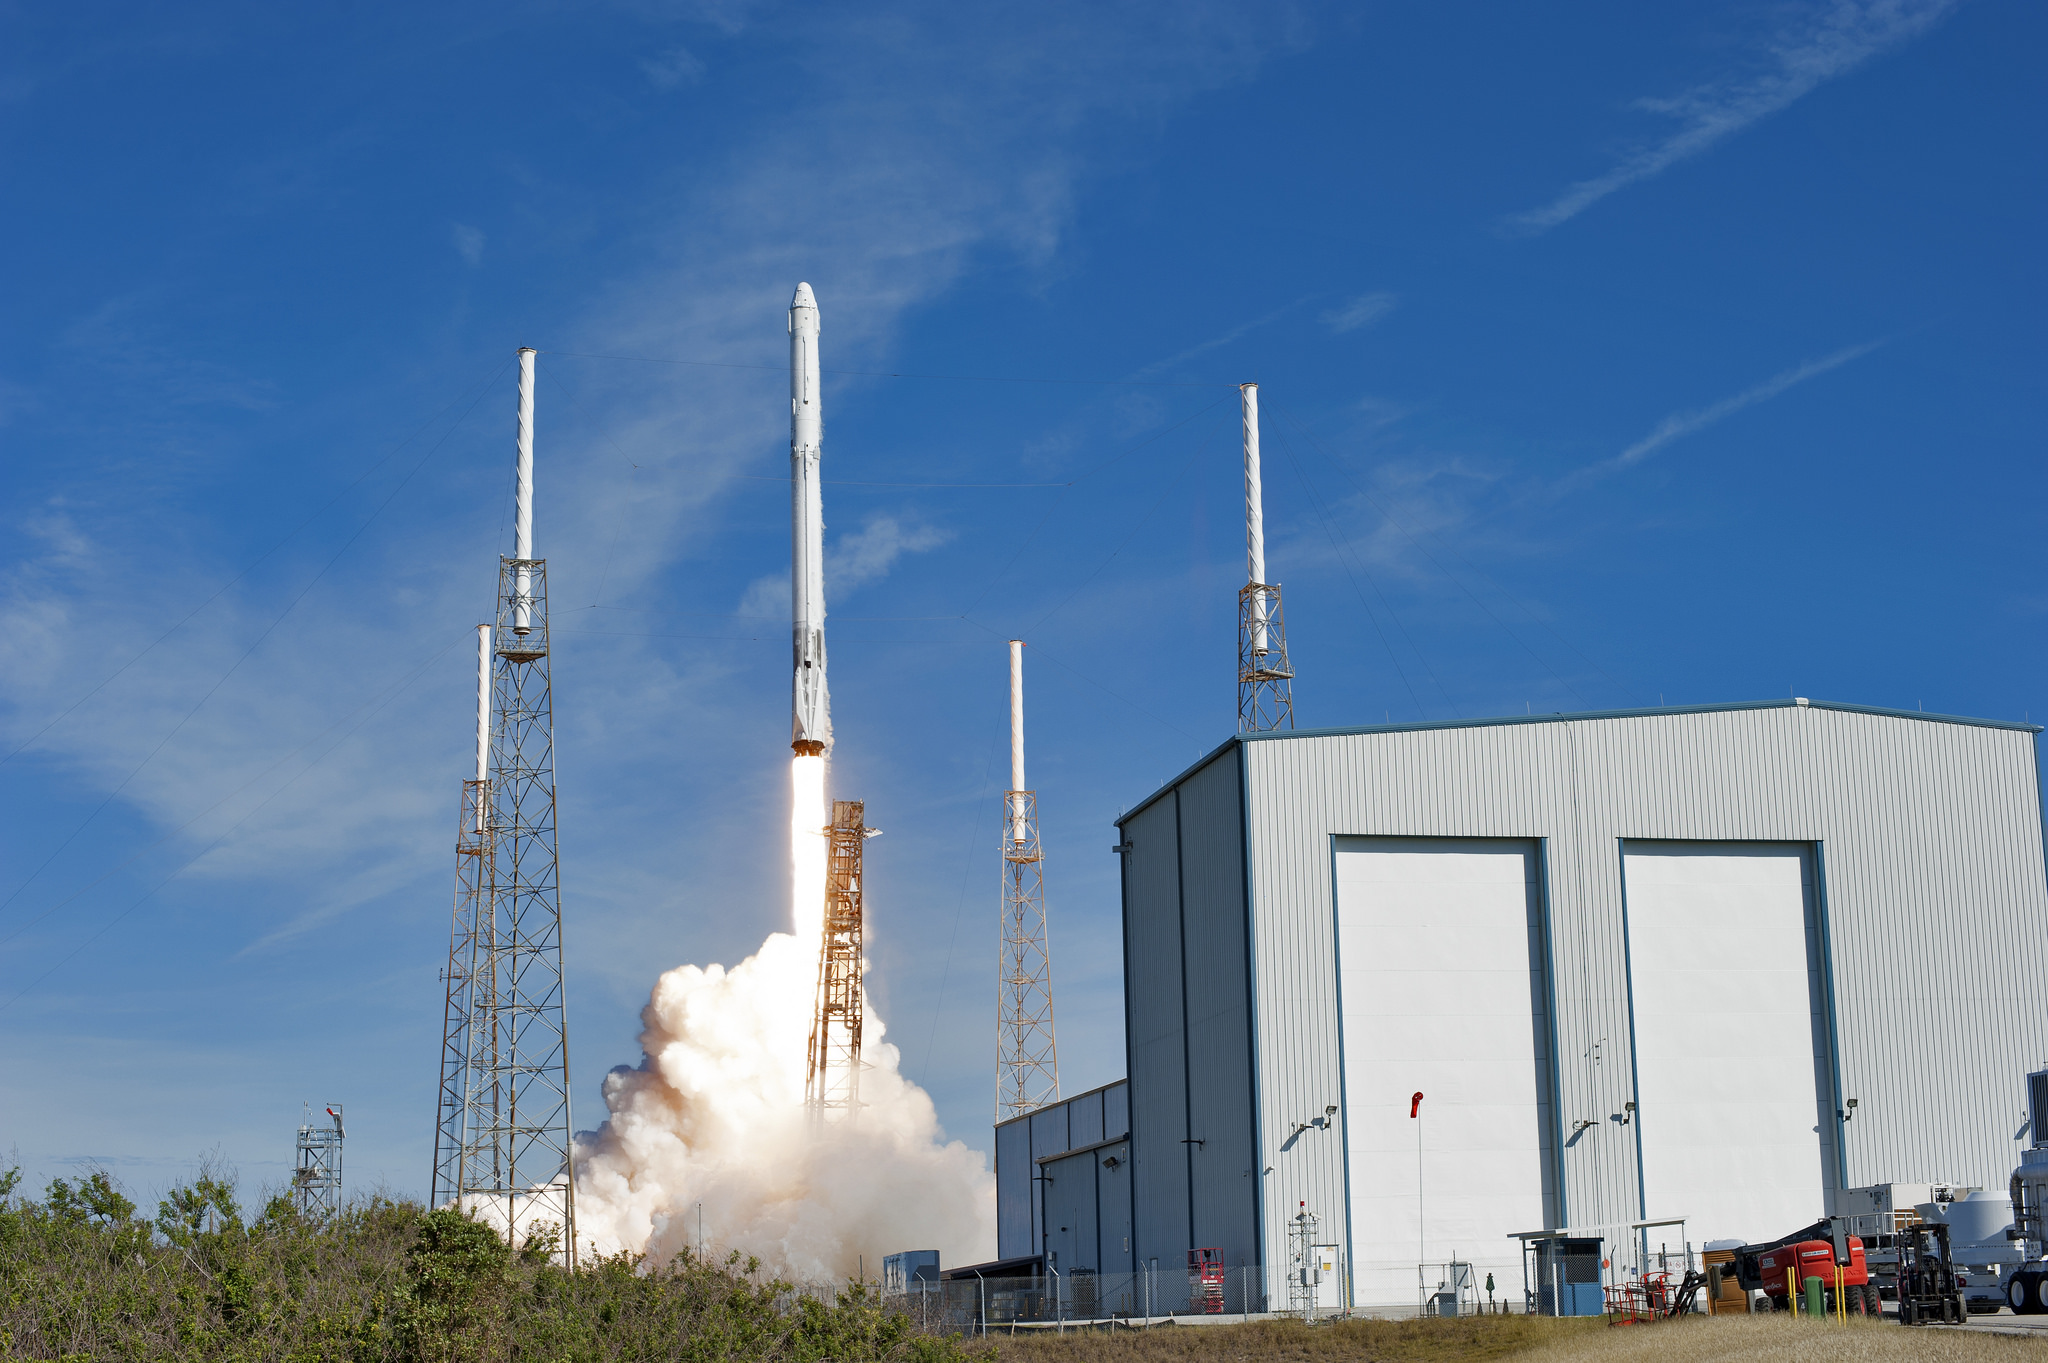 14th resupply mission of commercial cargo provider SpaceX to the International Space Station.